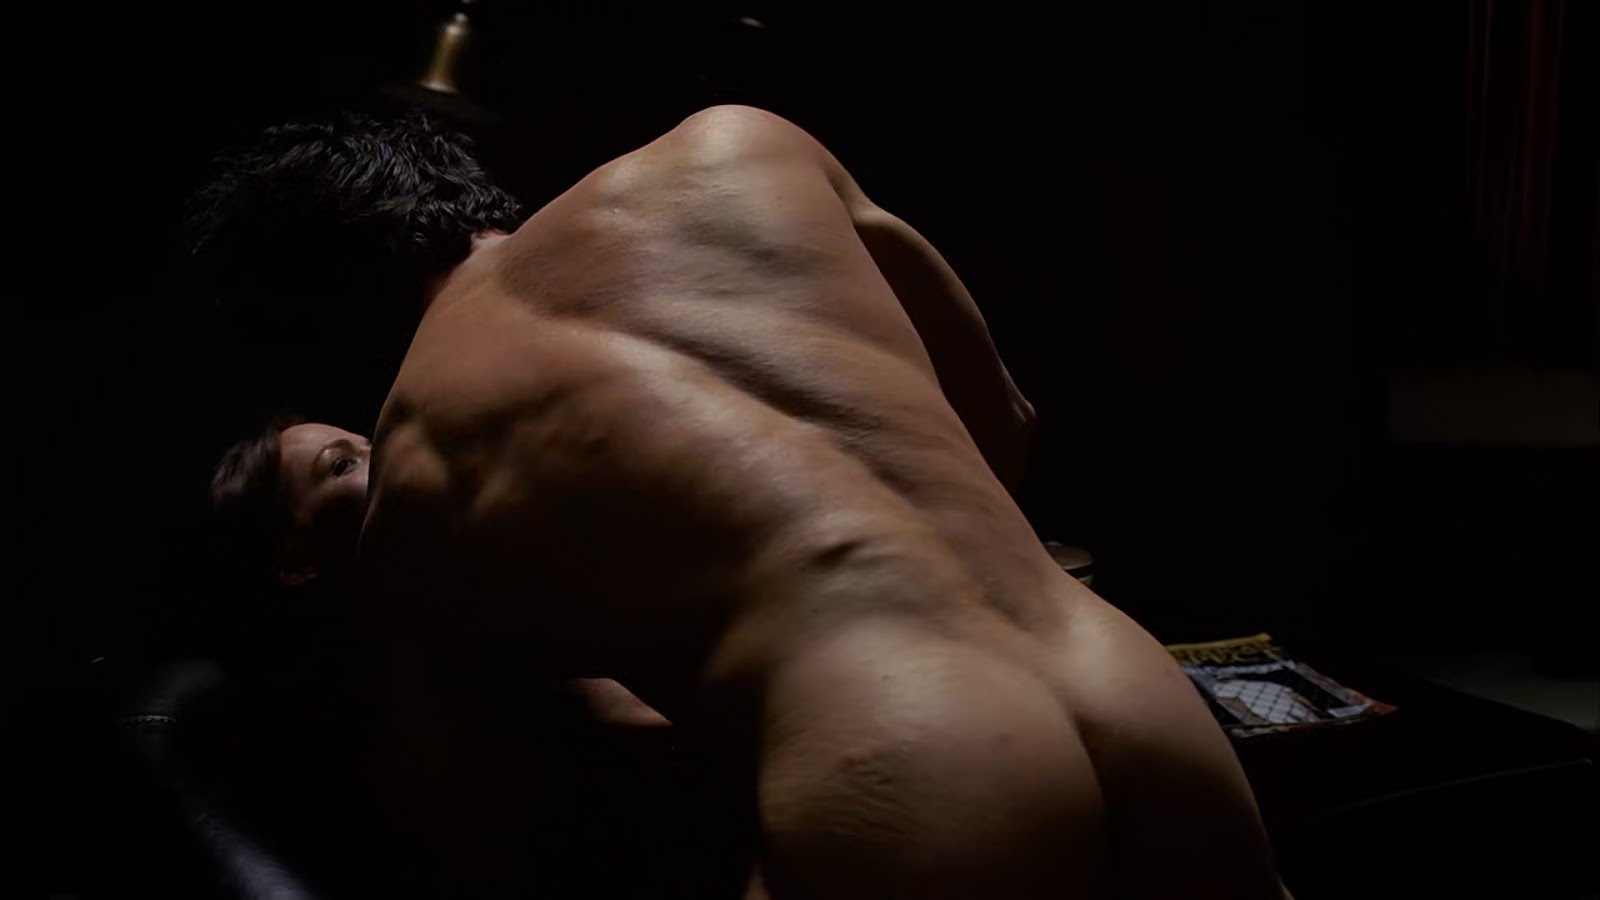 Kelly overton nude boobs and butt in true blood.